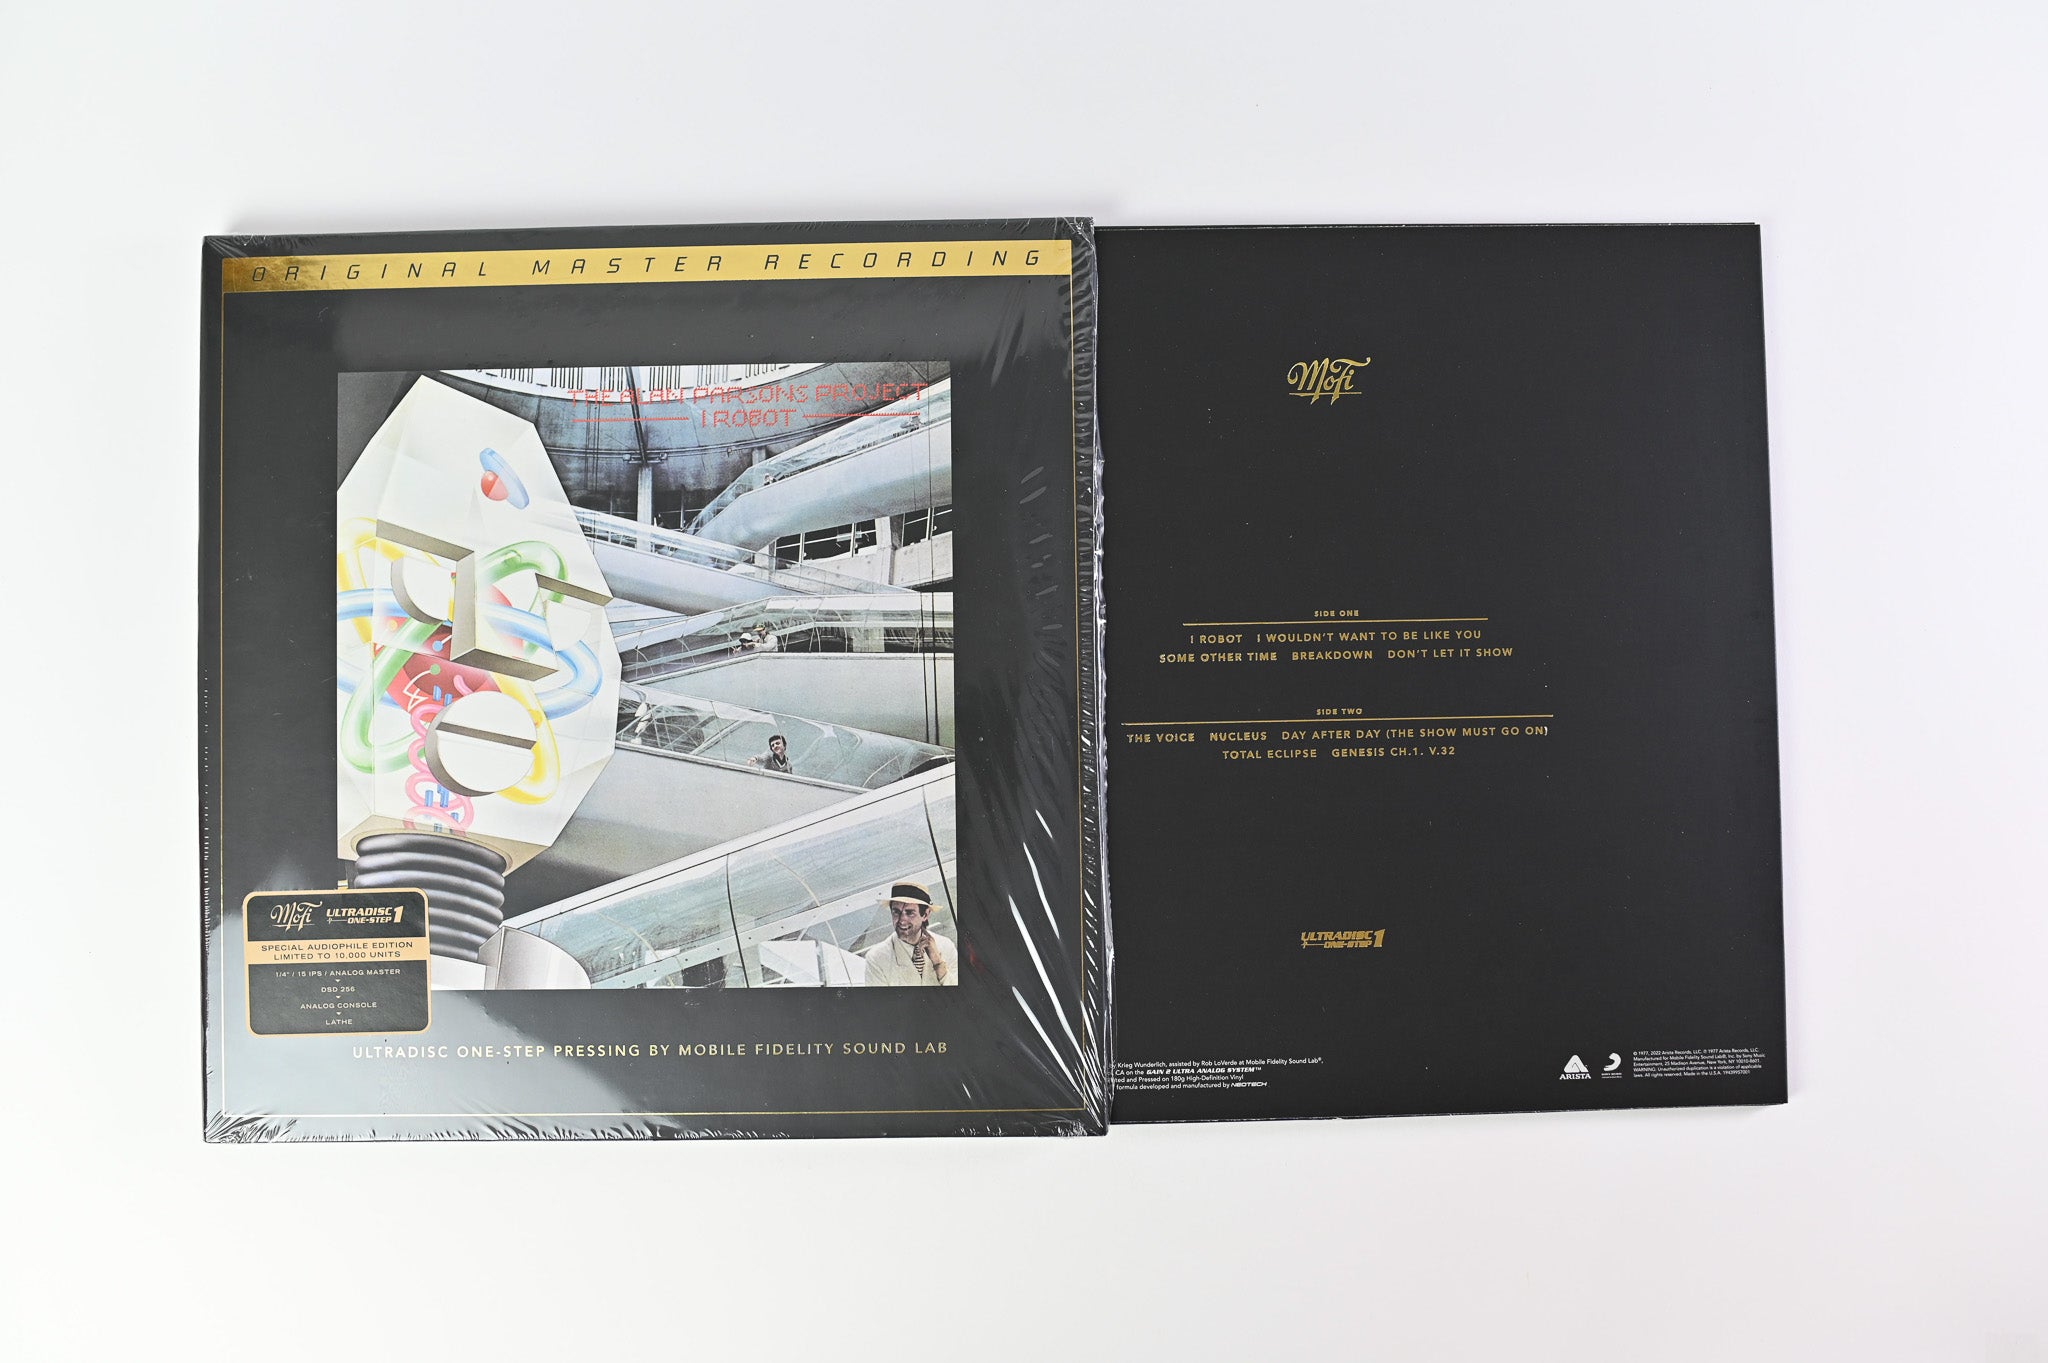 The Alan Parsons Project - I Robot Mobile Fidelity Sound Lab Ultradisc Reissue